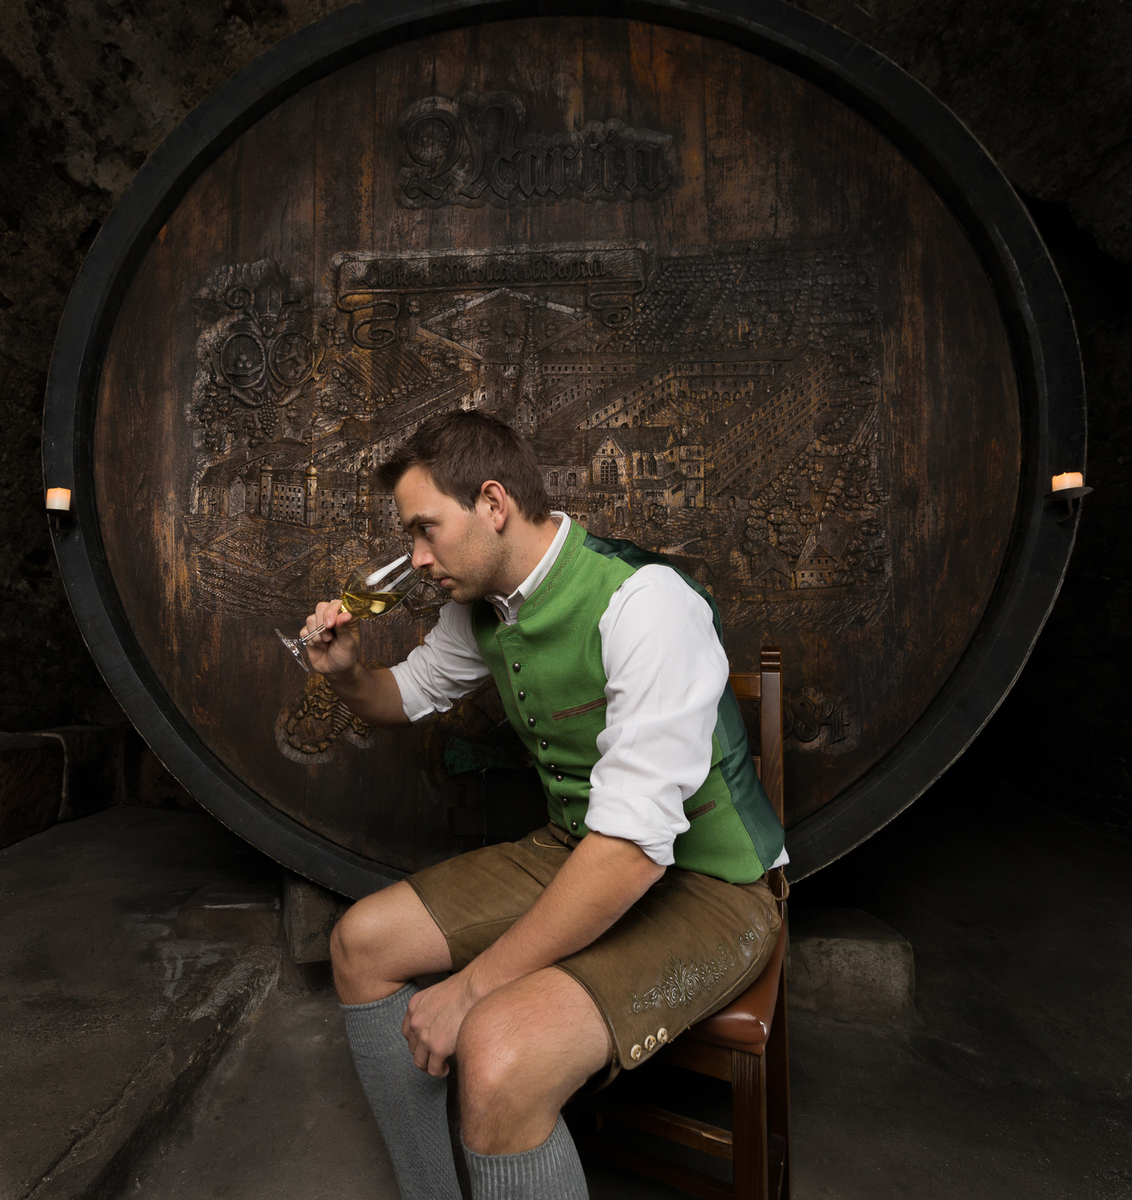 Martin Saahs in front of a barrel in the cellar of Nikolaihof